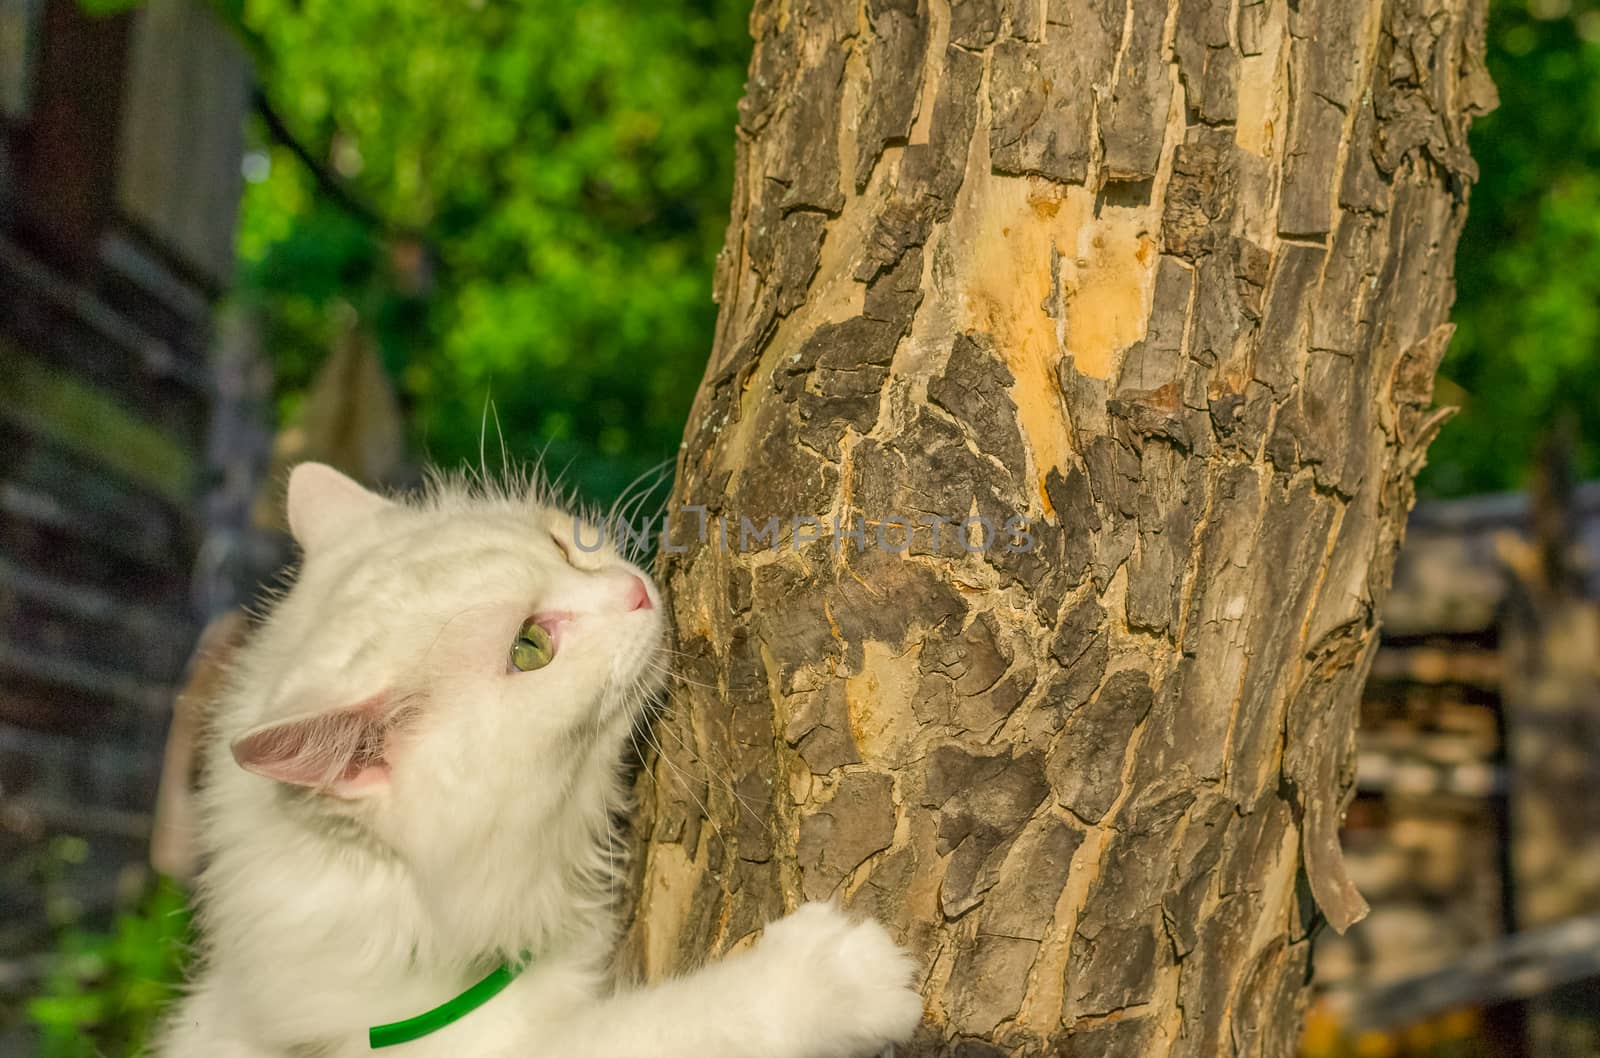 the cat is crawling on a tree a white cat wild cats in nature